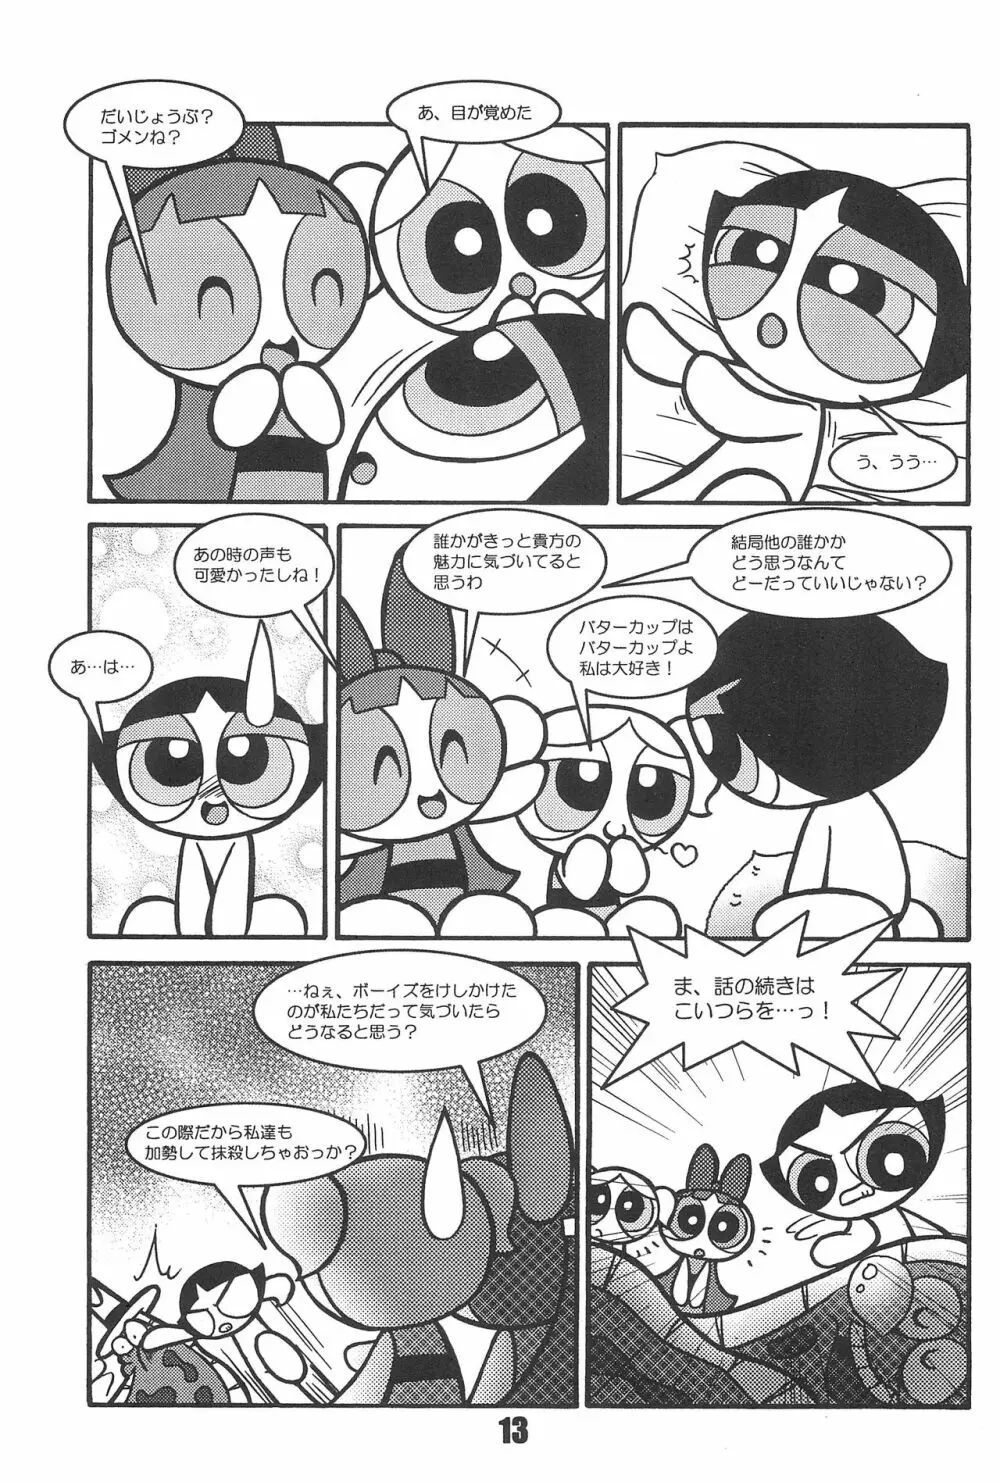 Show Goes On! Funhouse 22th Page.13